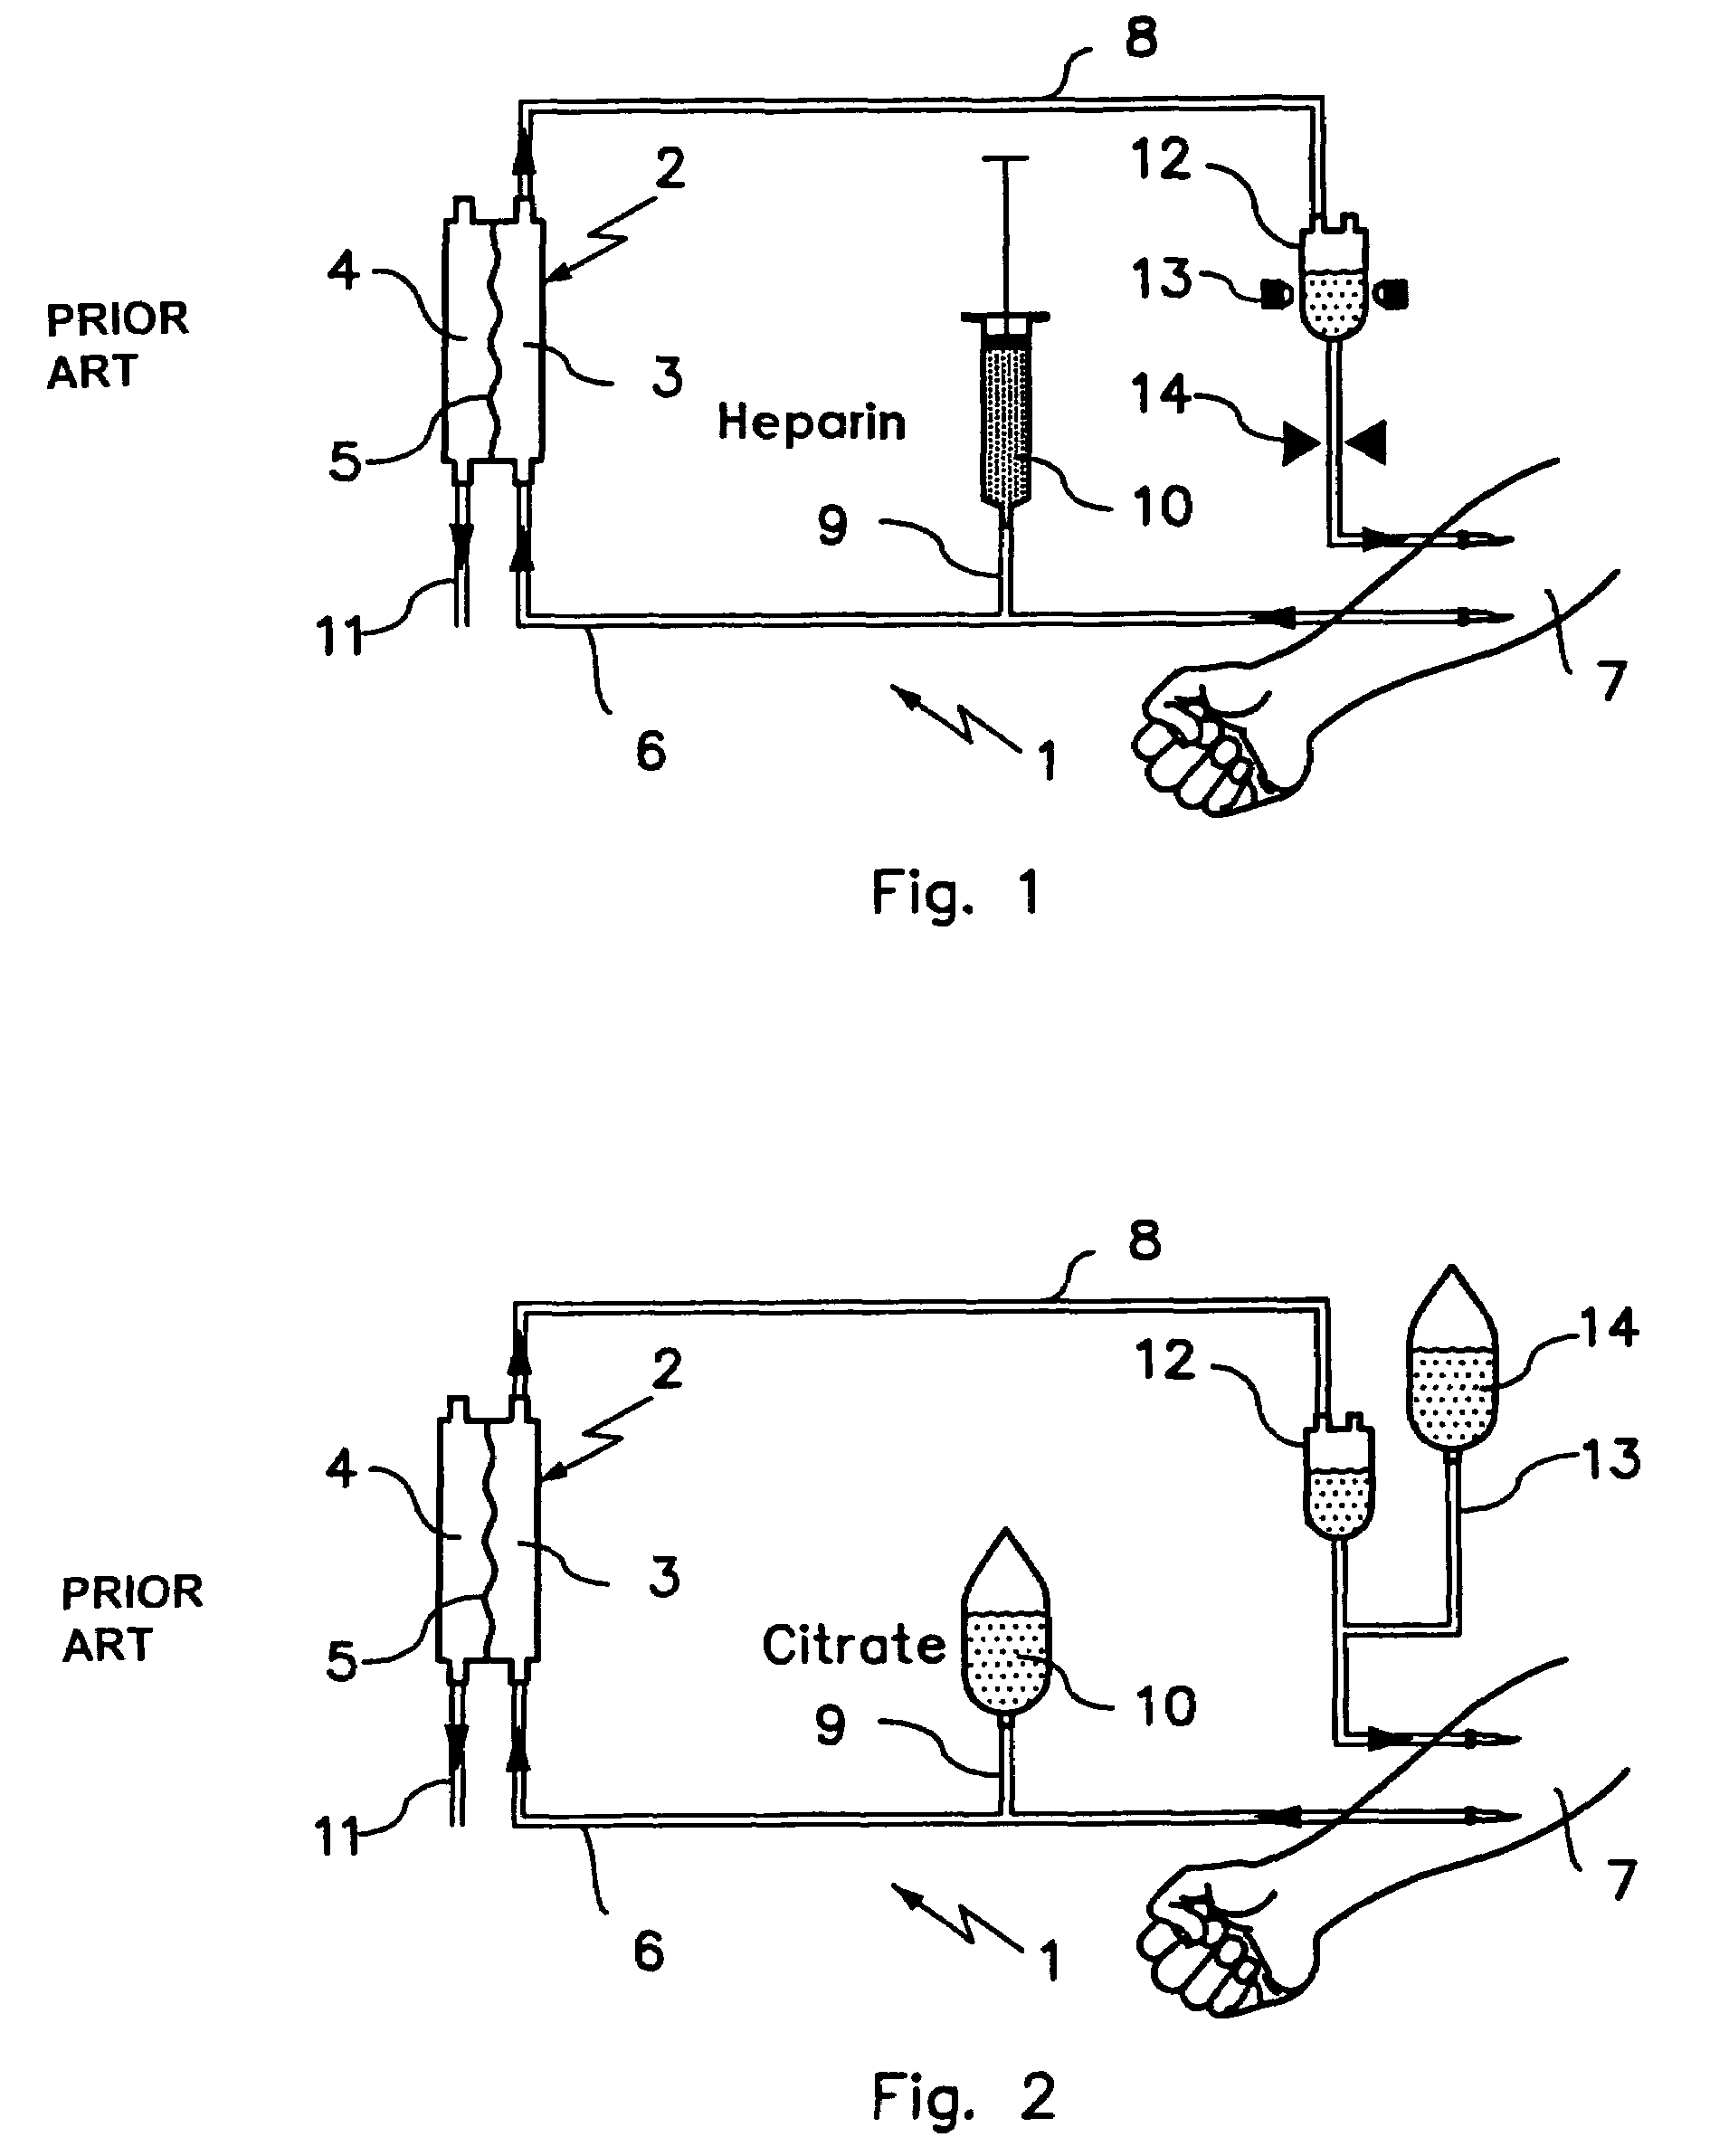 Device and process for extracorporeal treatment by citrate anticoagulant